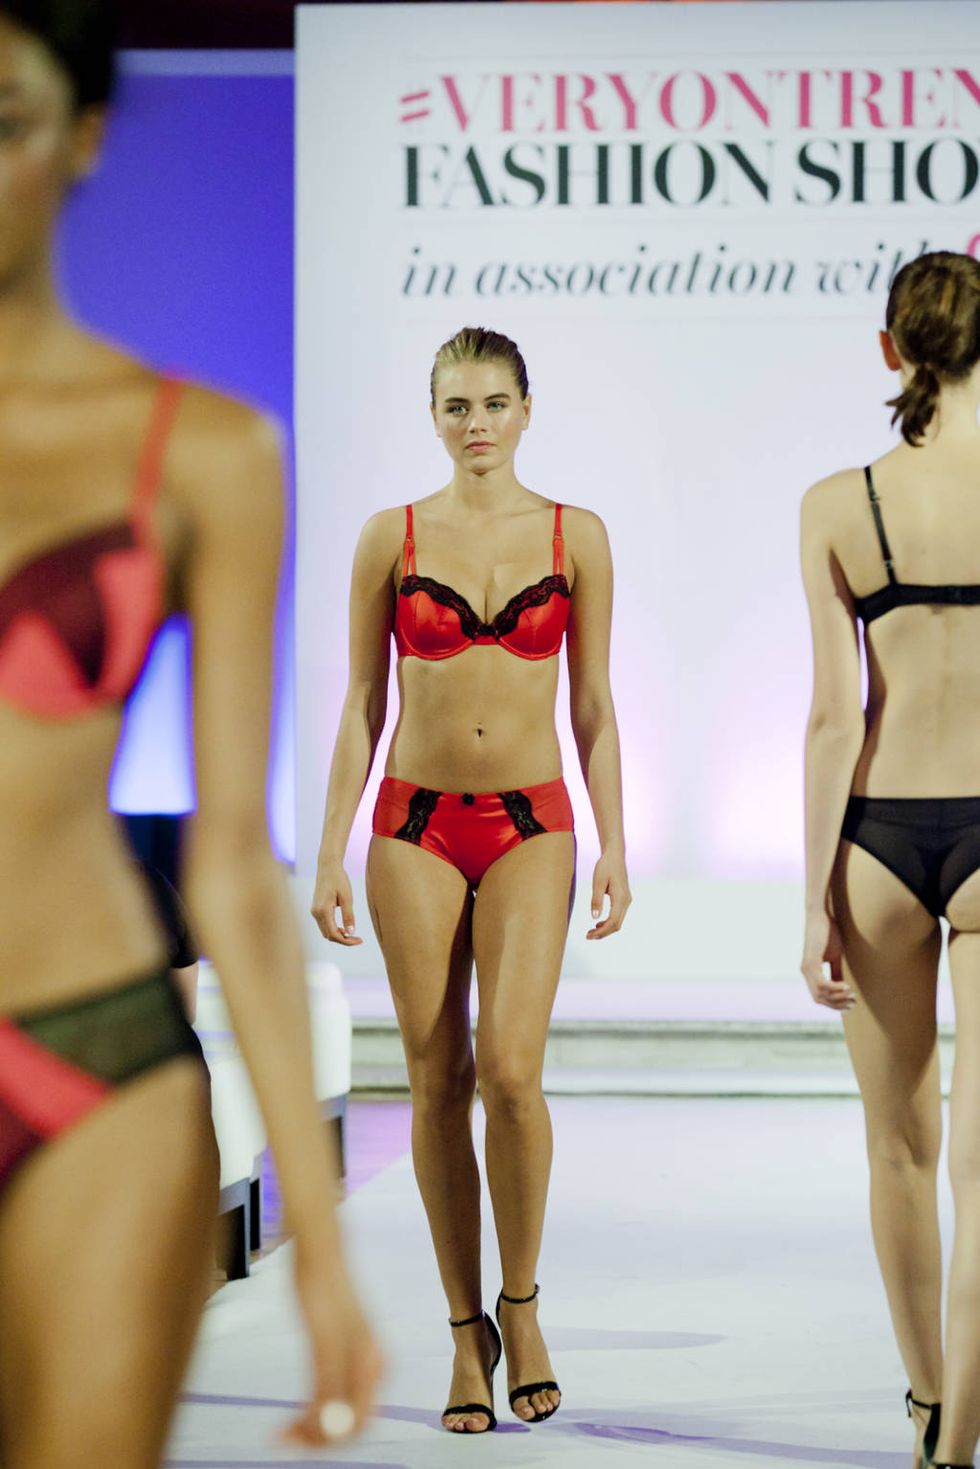 Lingerie looks from the #VeryOnTrend catwalk show with Cosmopolitan